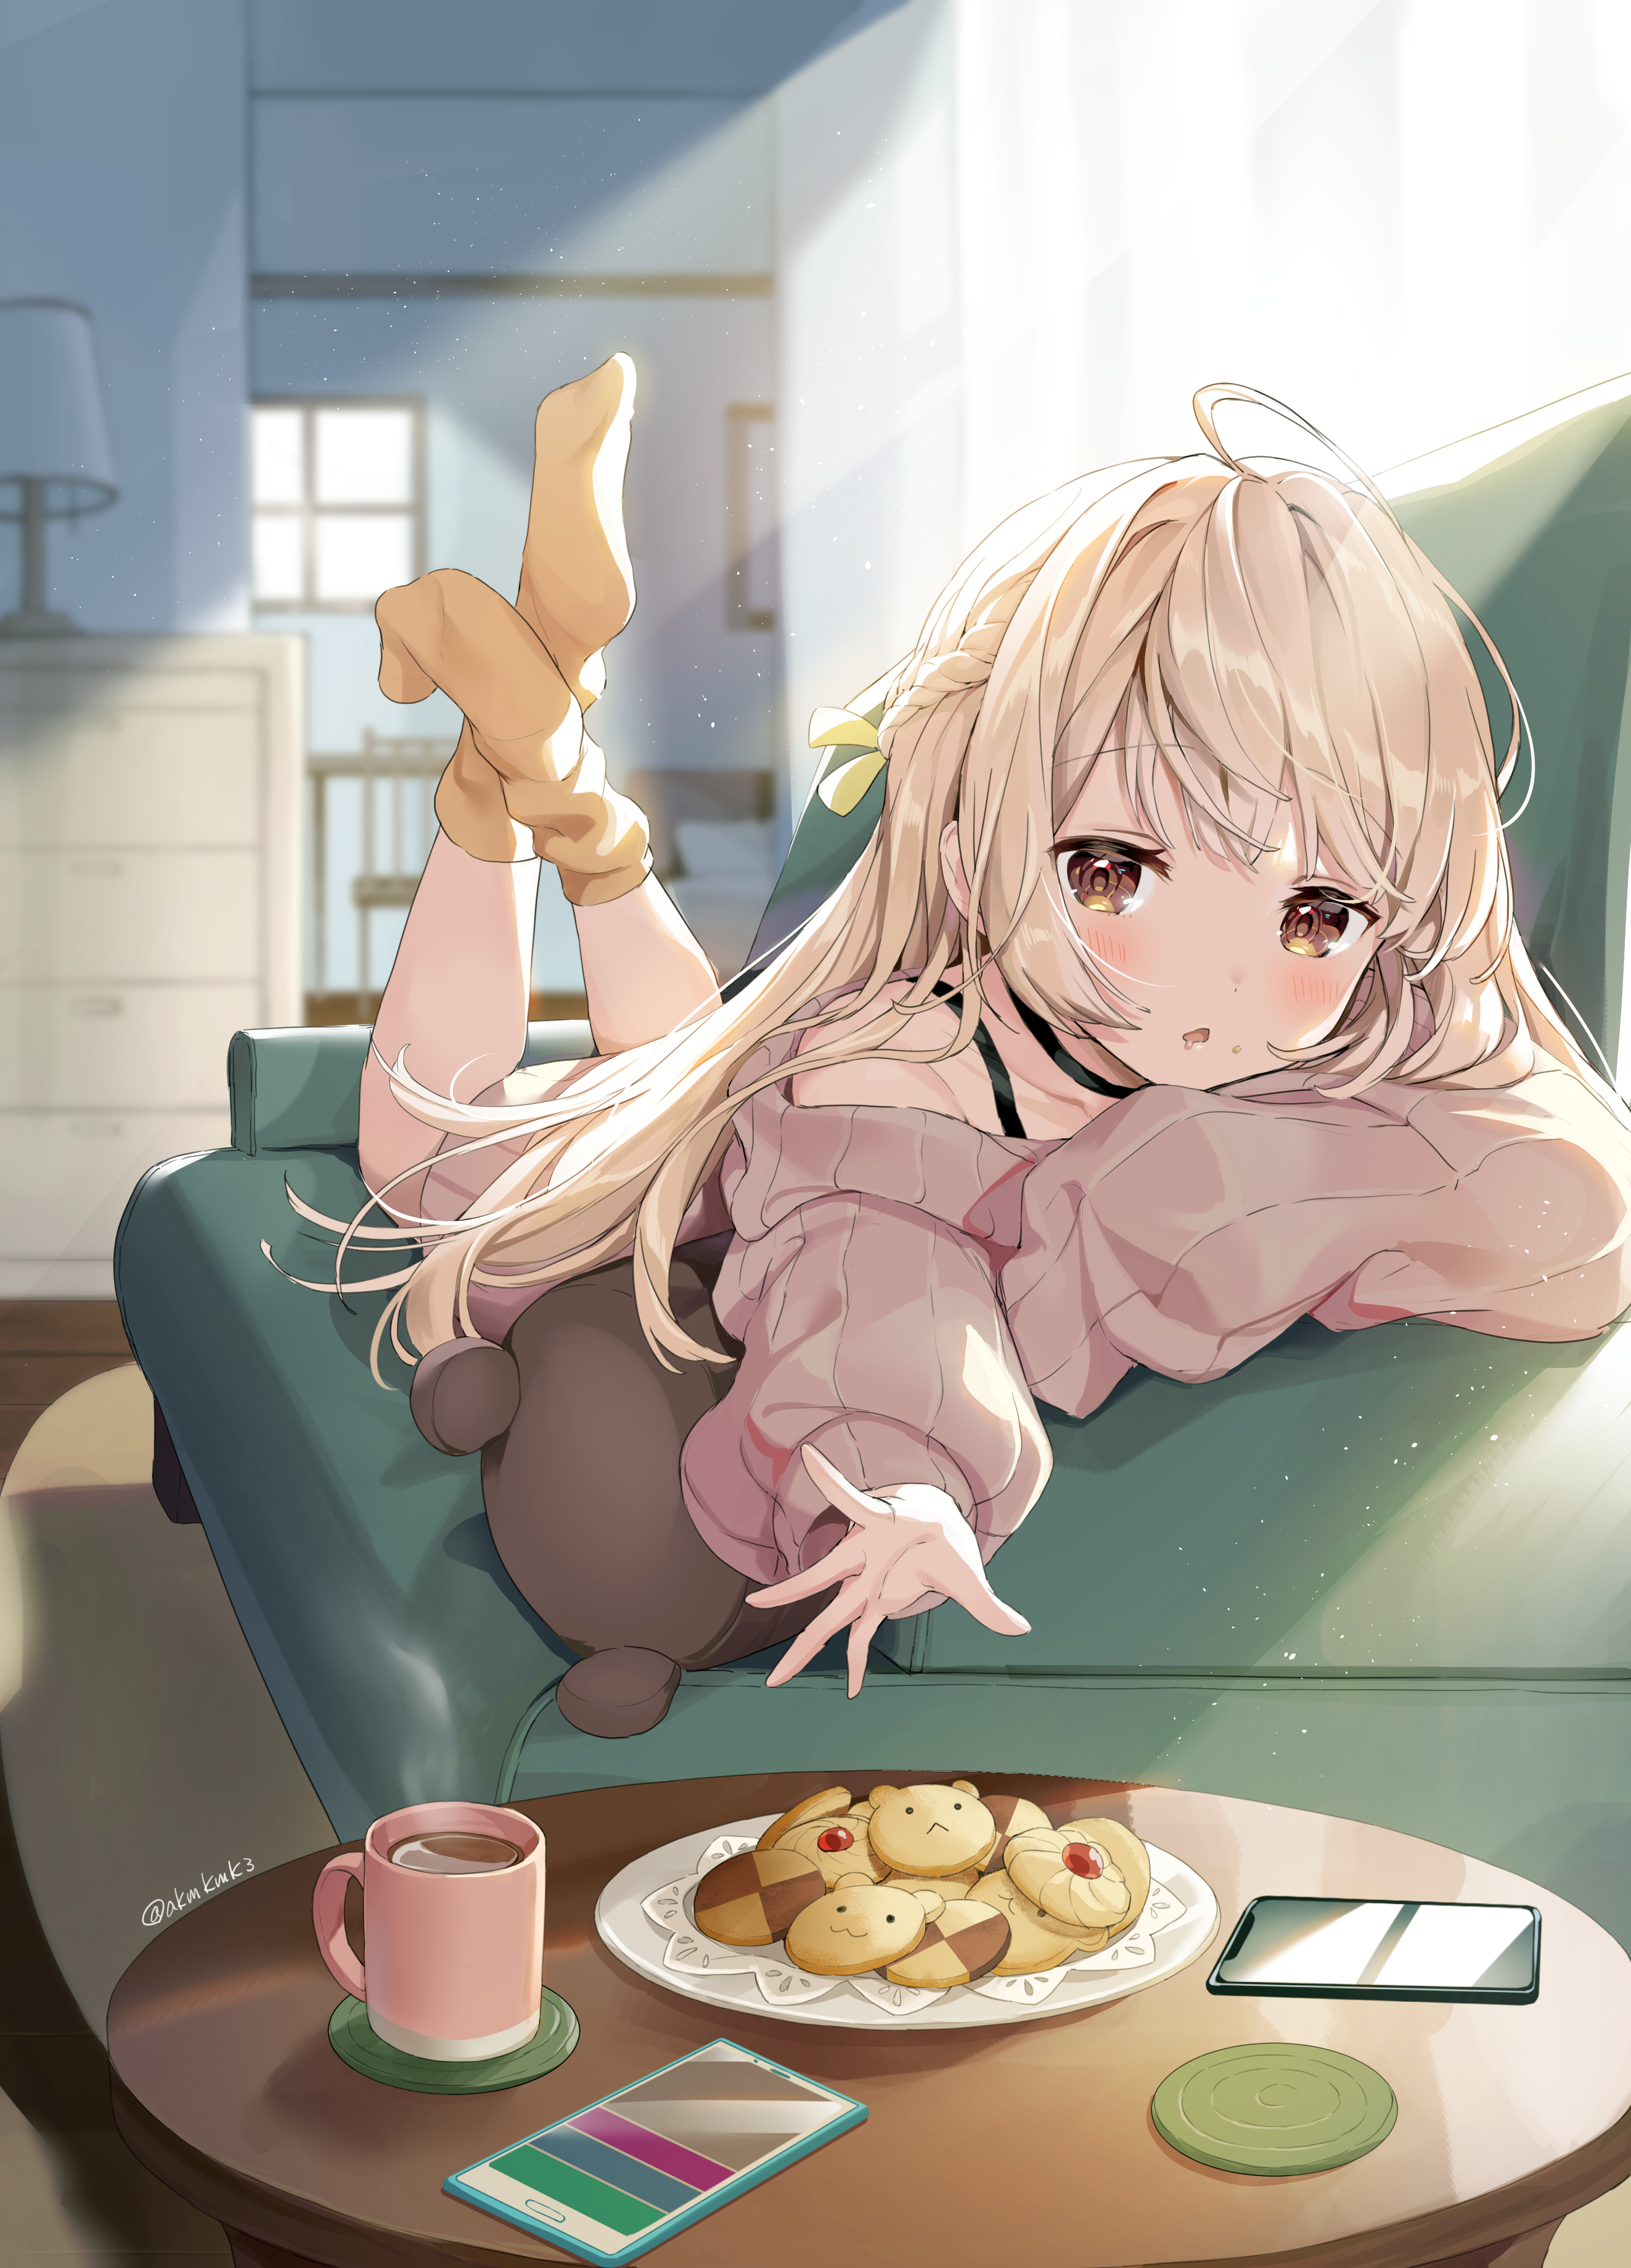 Anime Girl Eating Cookie Wallpapers